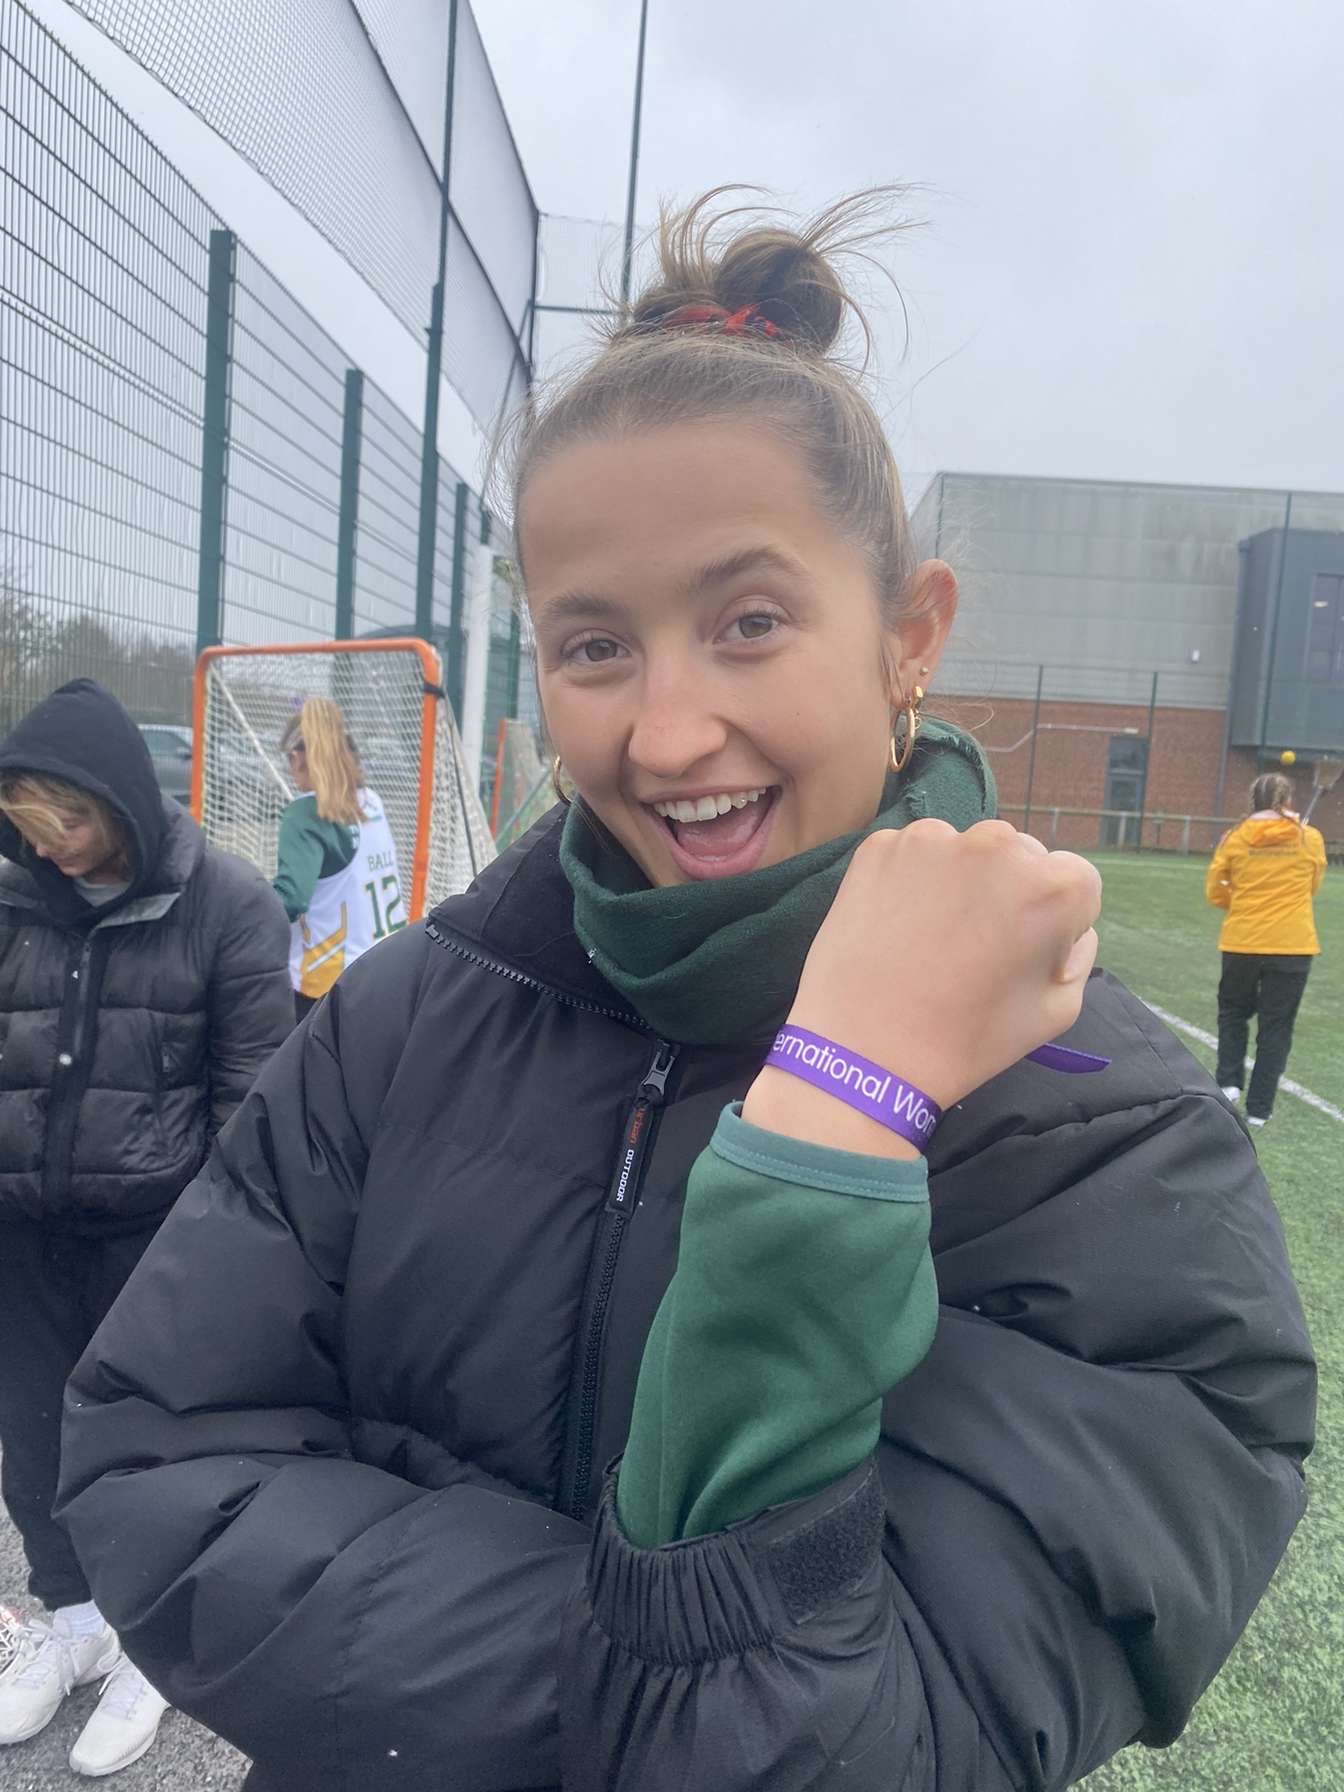 The team all wore International Women's Day wristbands during their match